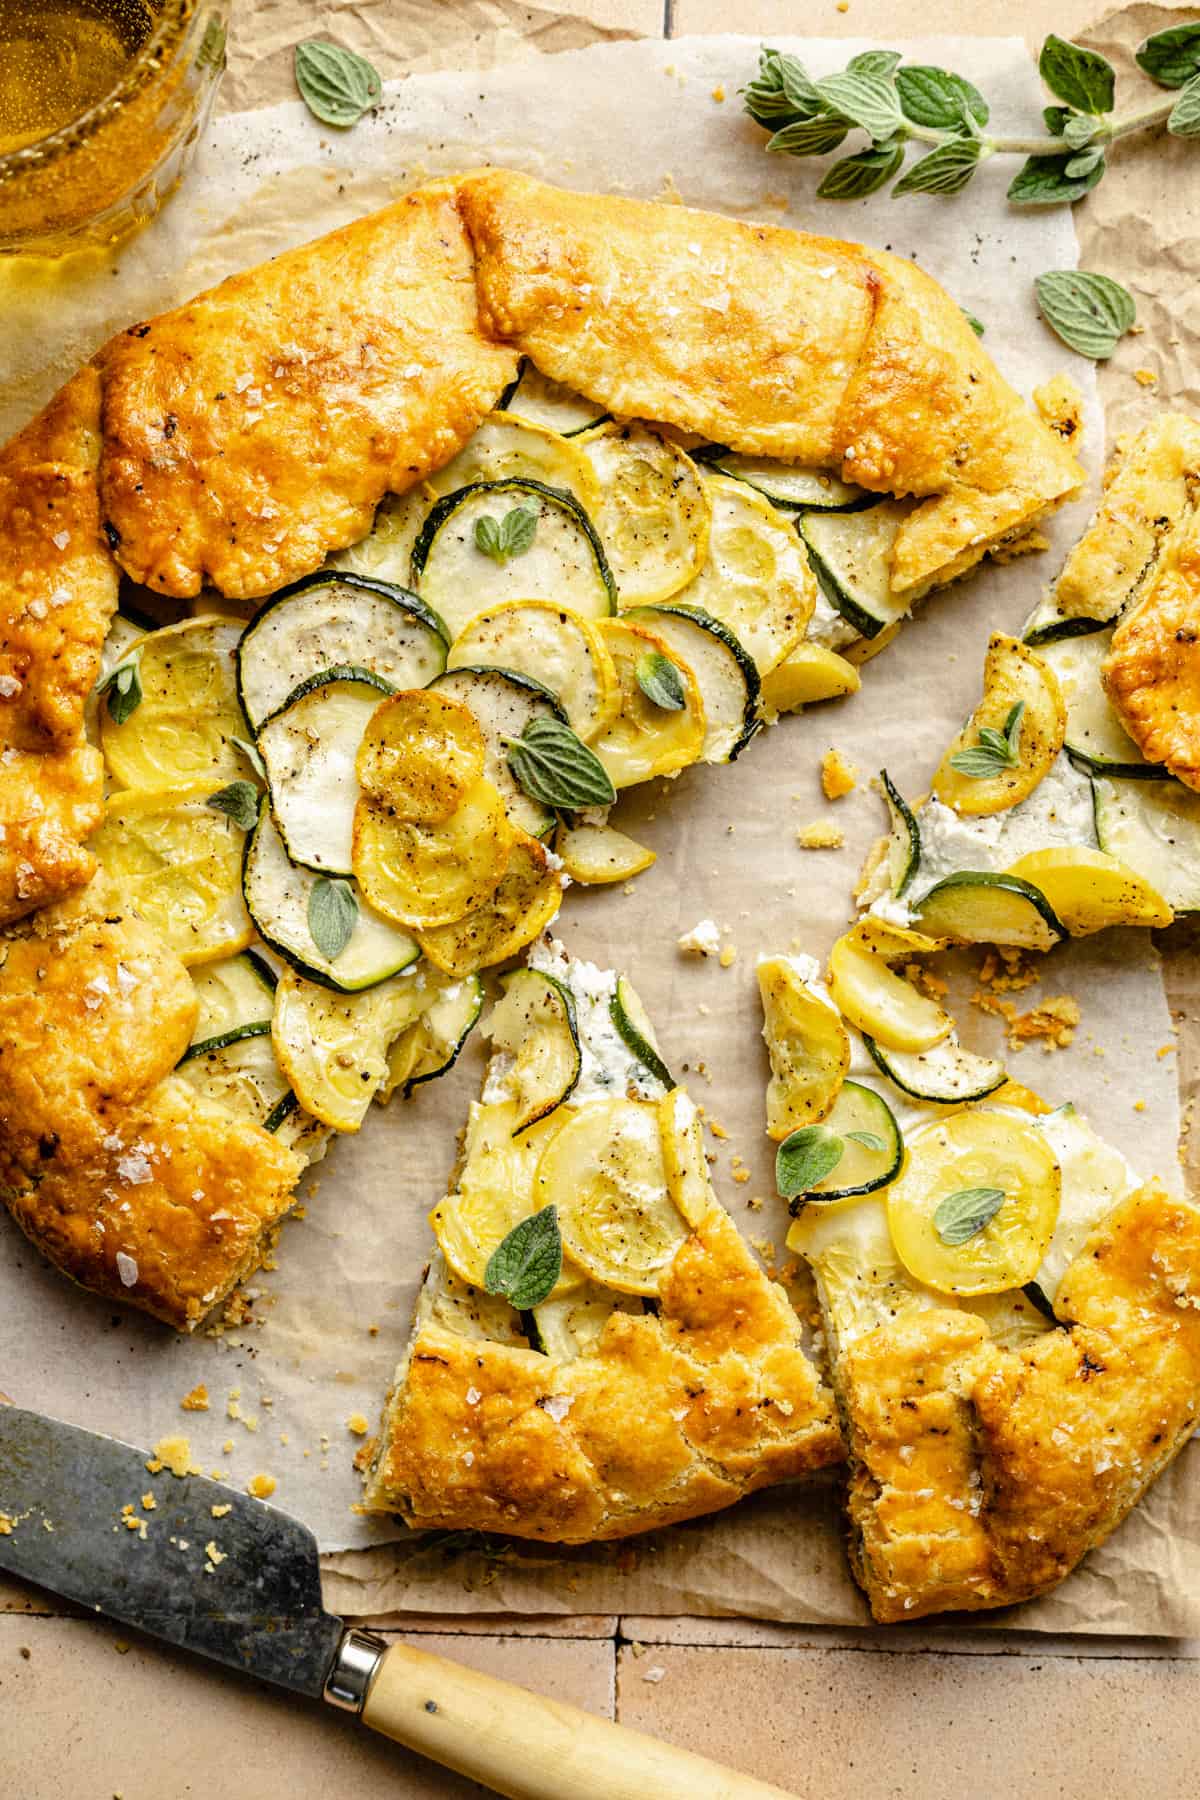 A couple of wedges of zucchini galette arranged on parchment with a knife.